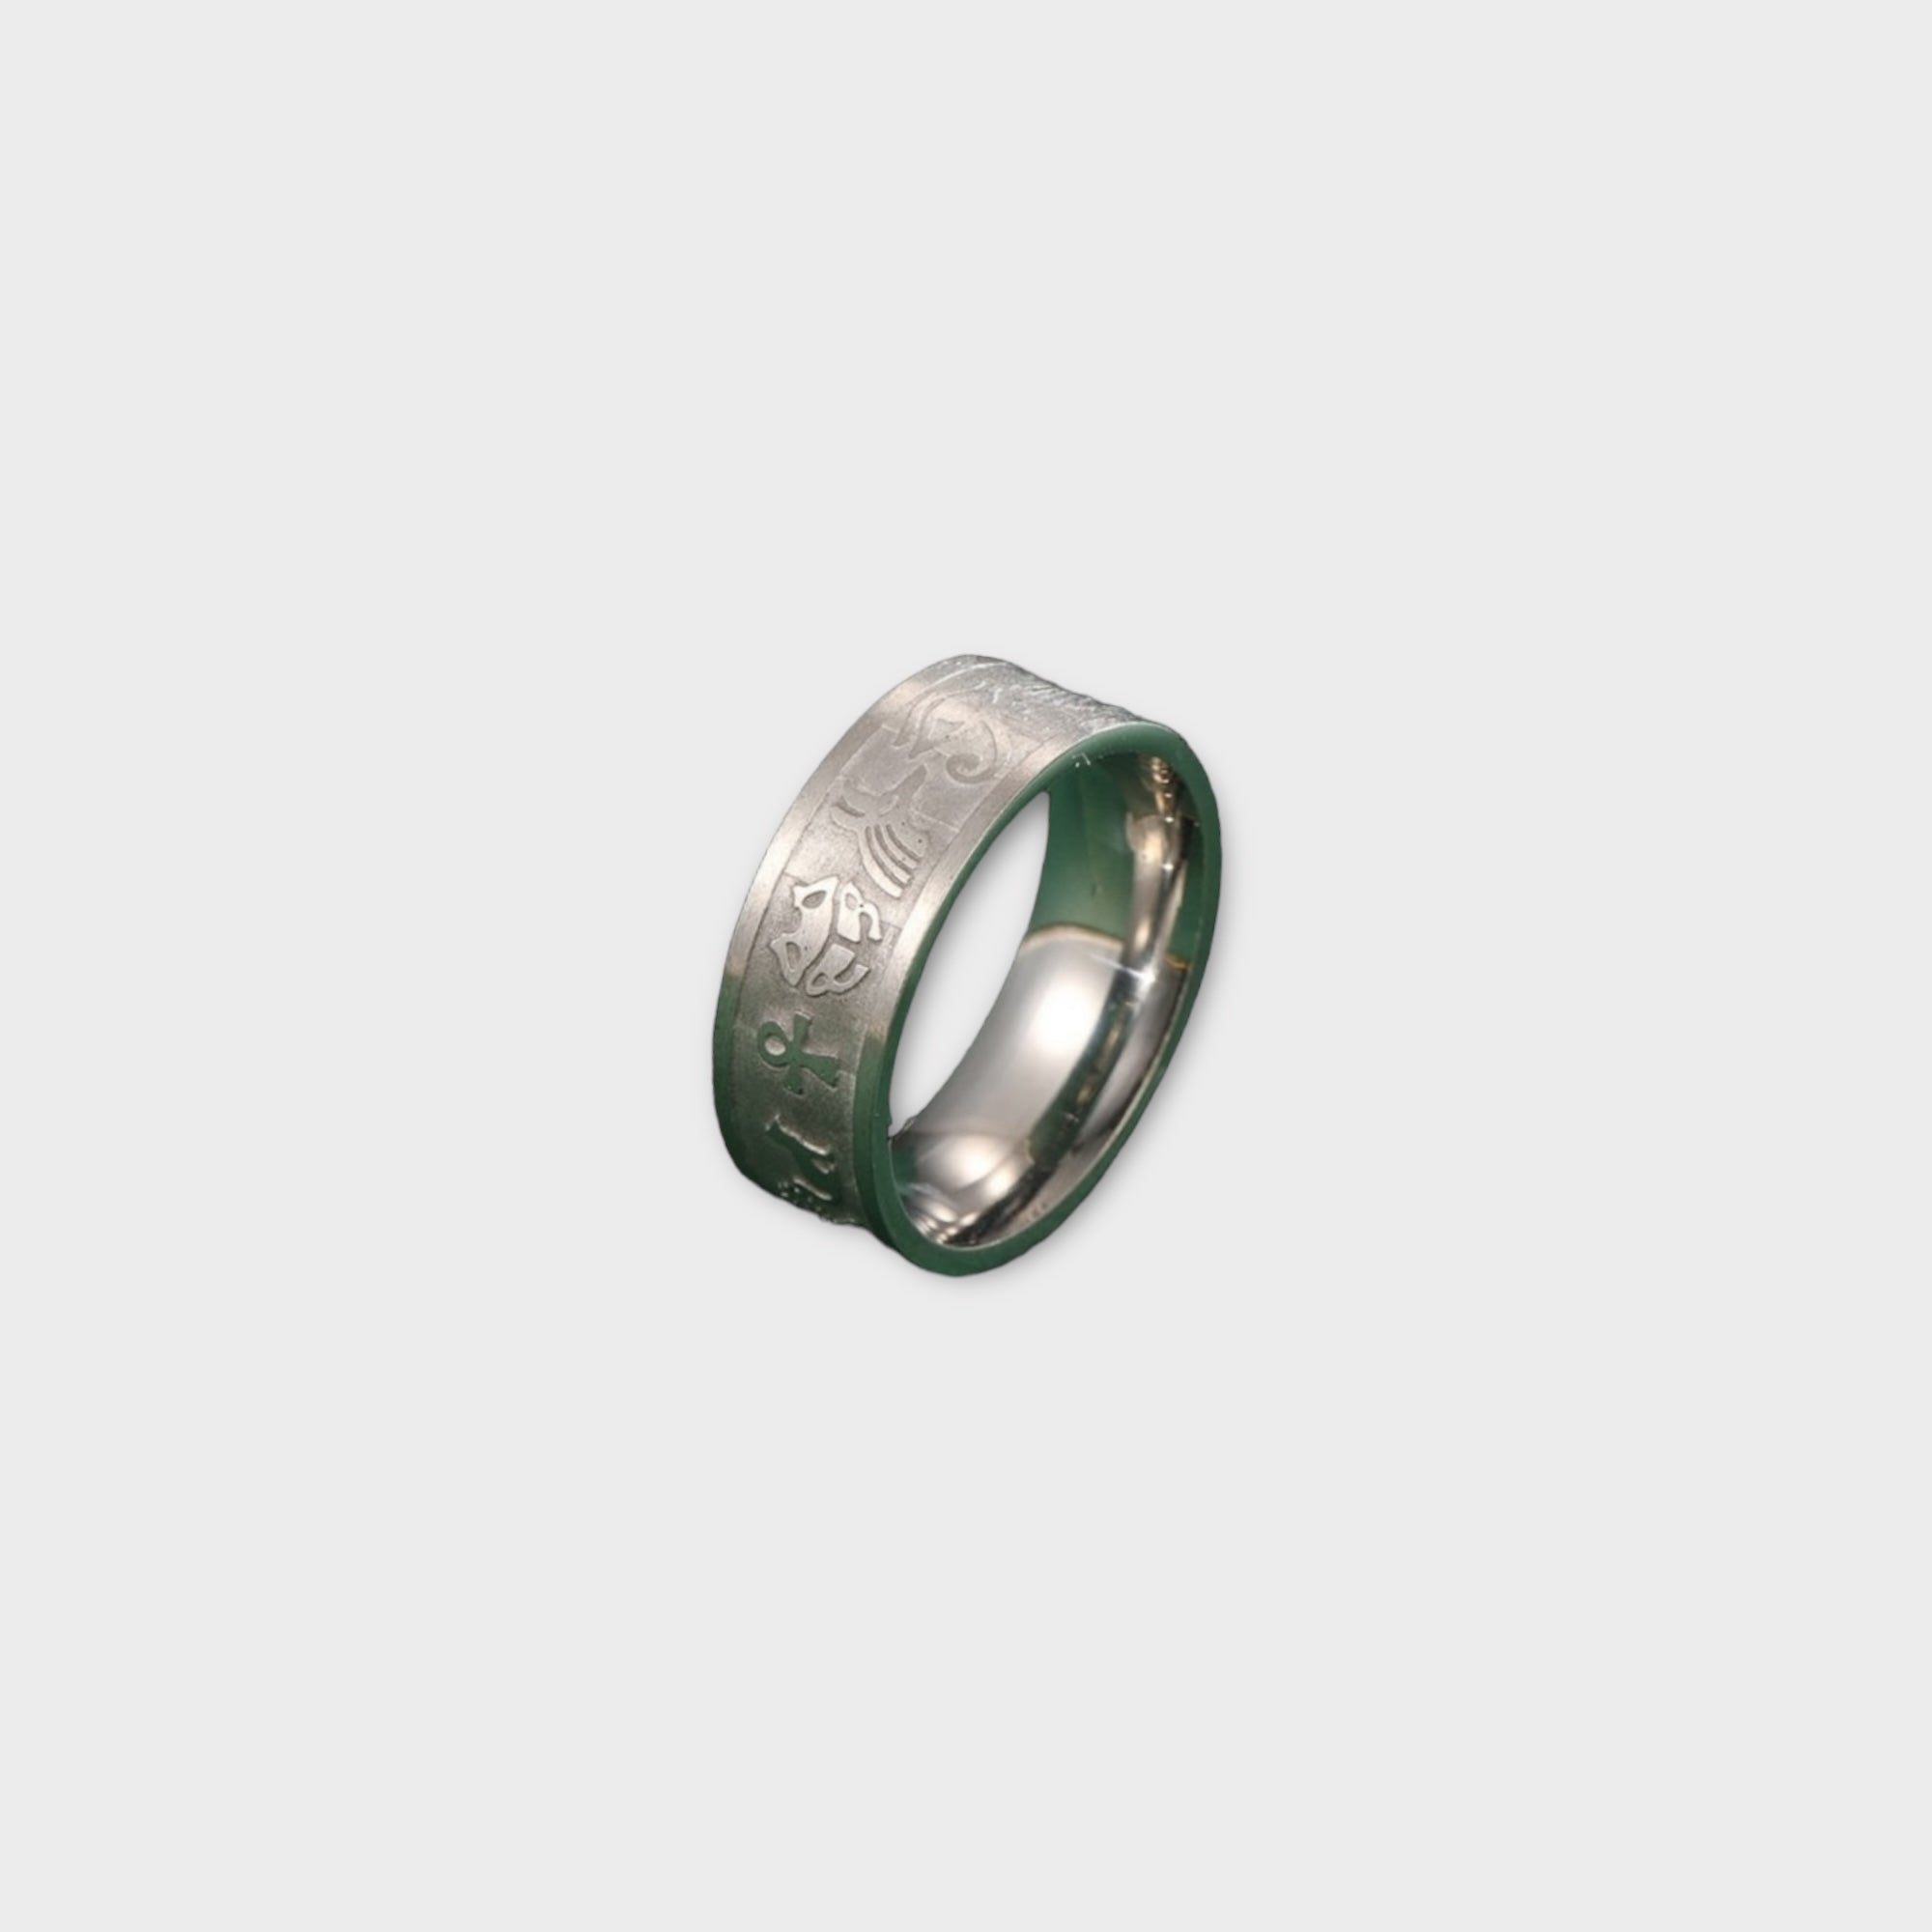 'GOW' Stainless steel ring for men and women